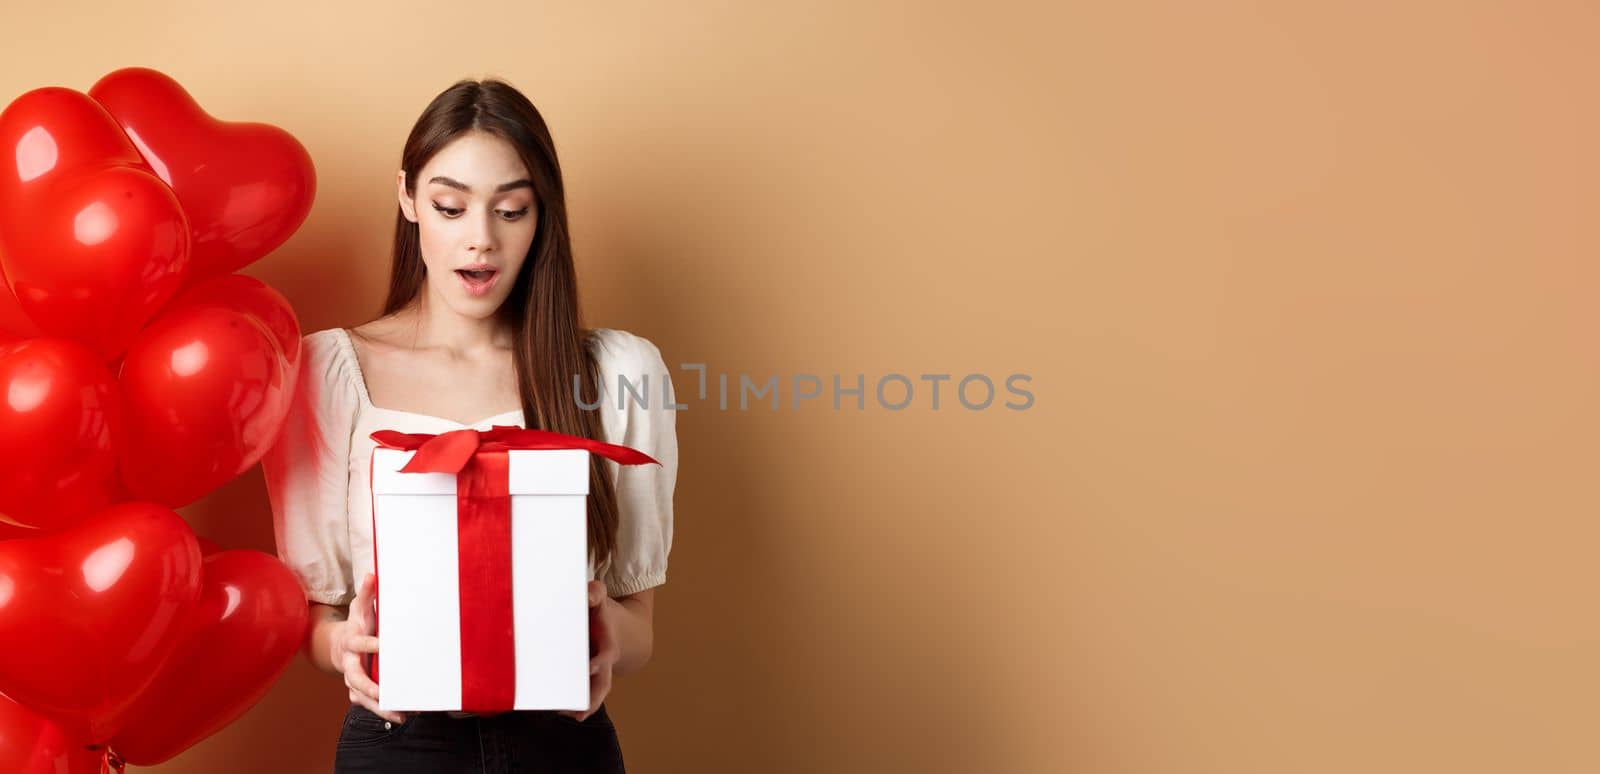 Surprised beautiful woman in romantic outfit, standing near heart balloons and looking at her gift on Valentines day, standing on beige background.